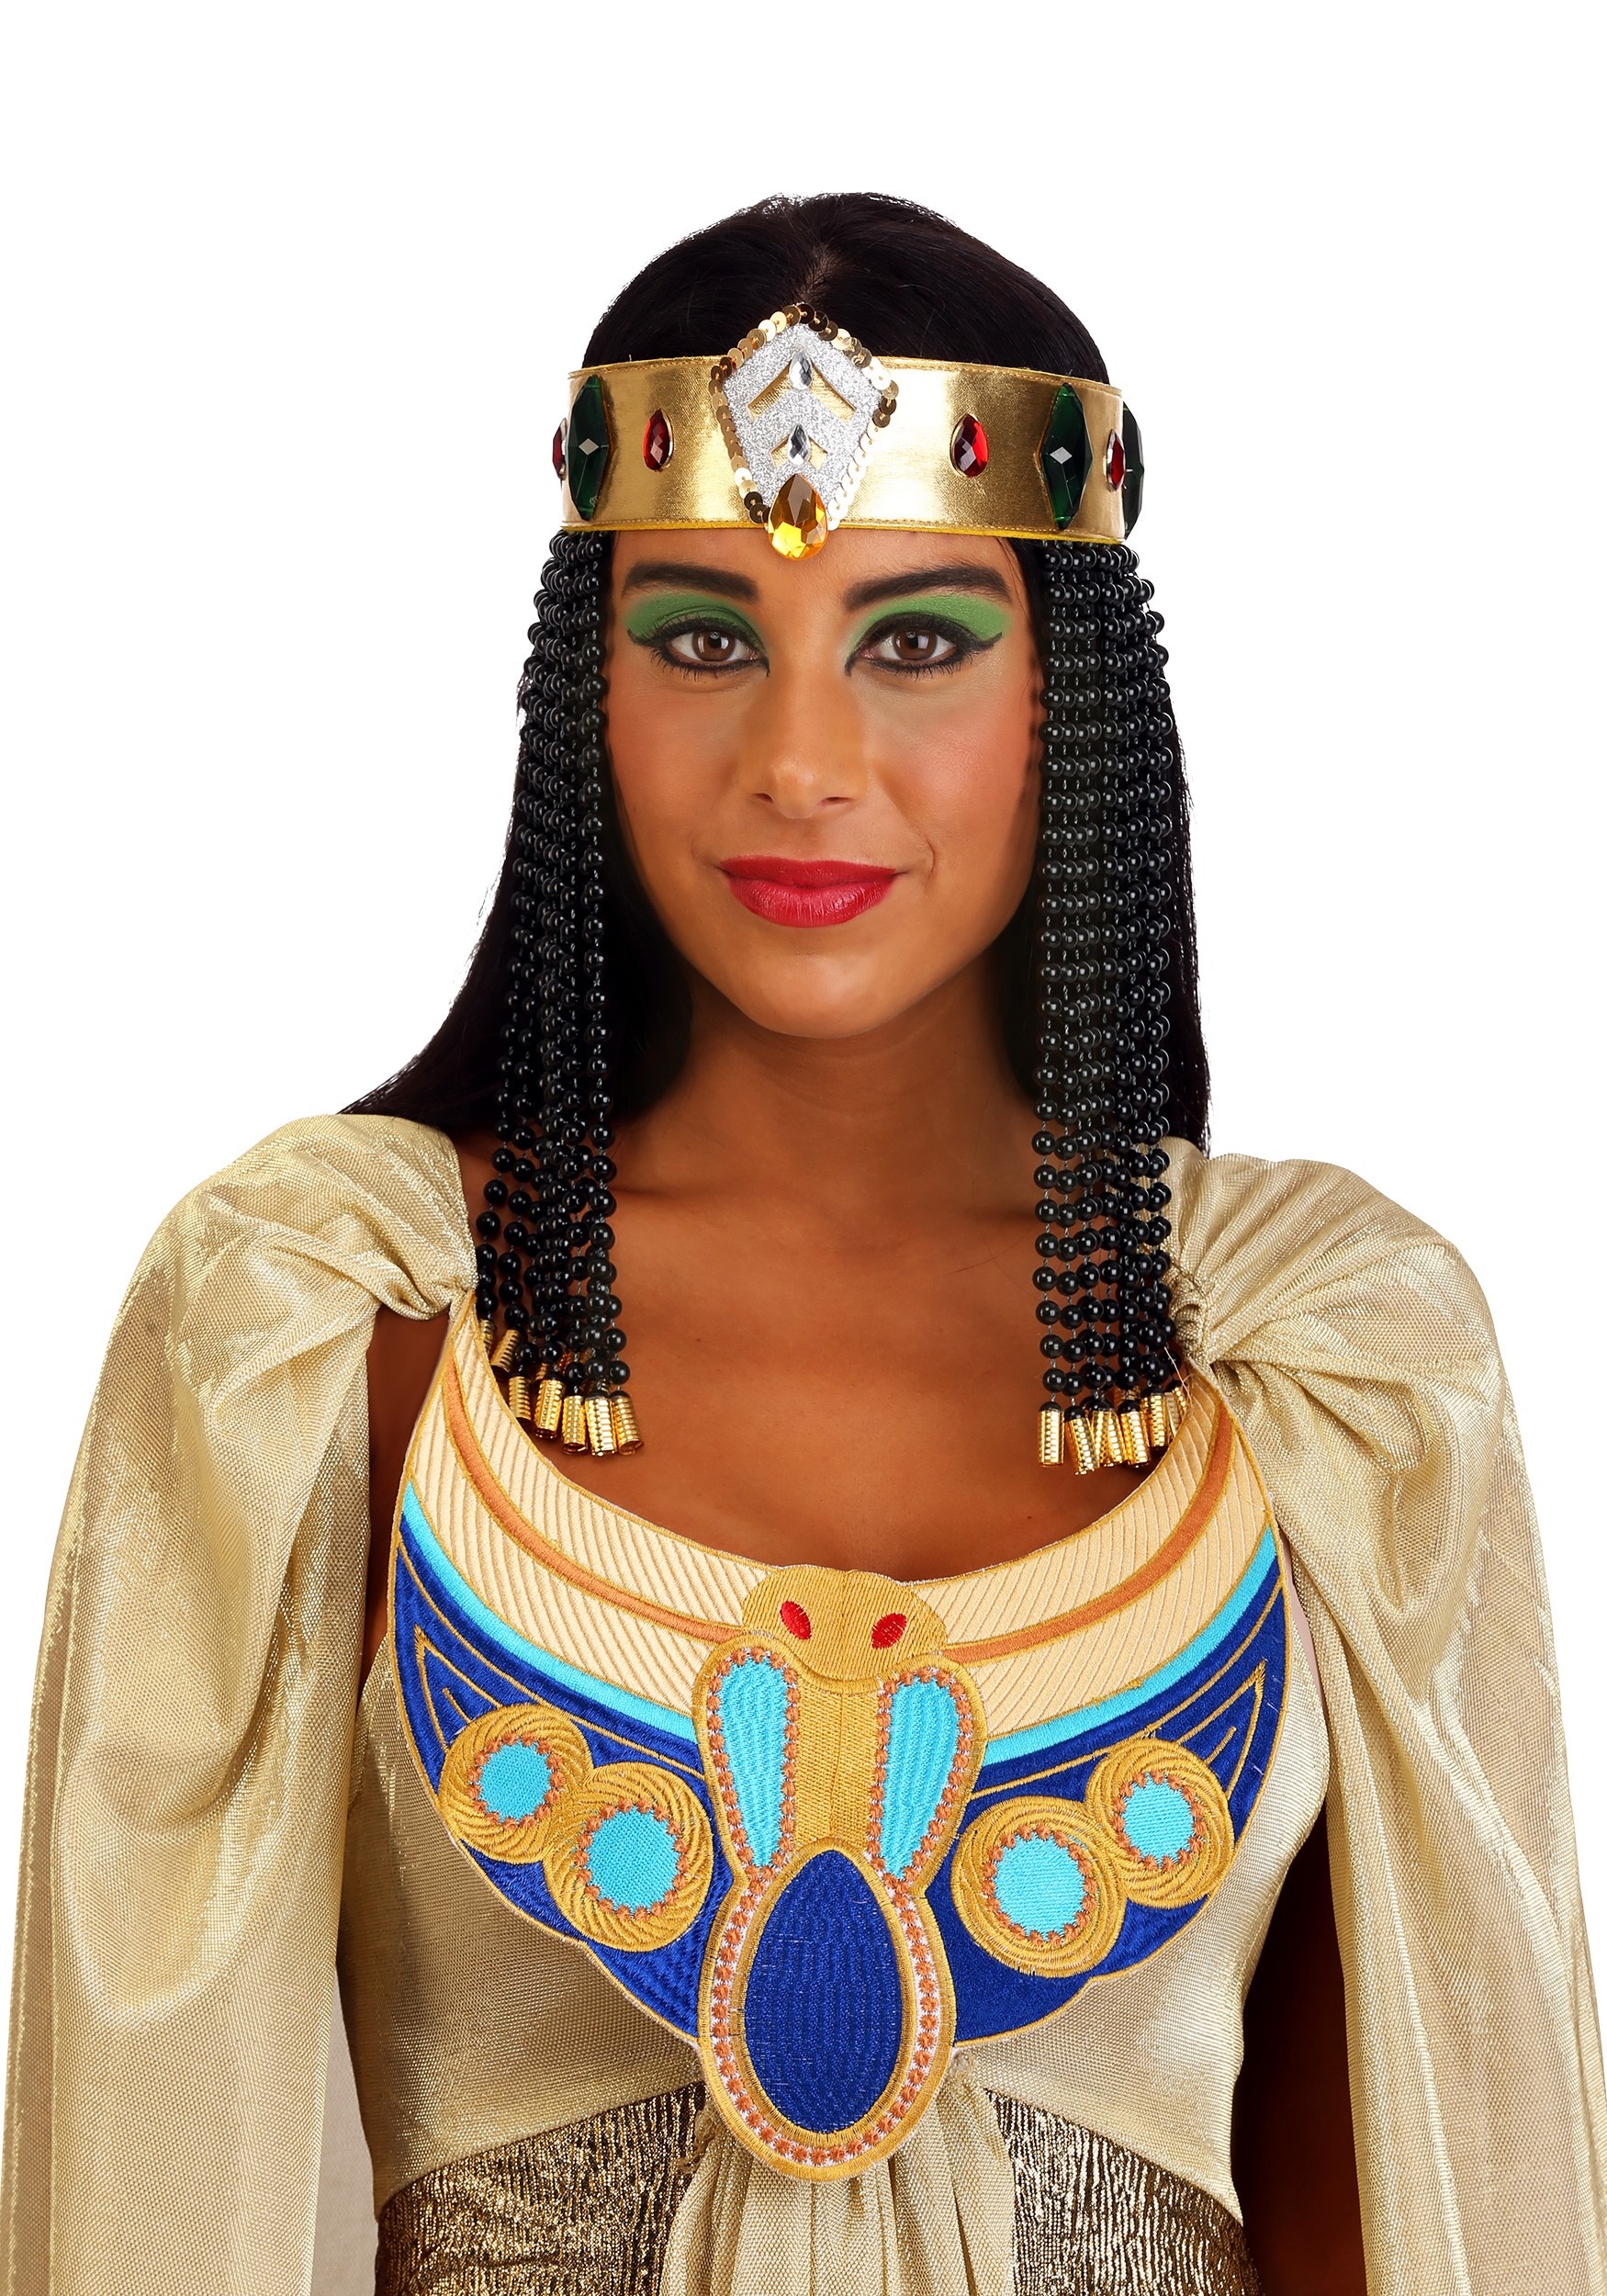 Cleopatra Headpiece Accessory for Women